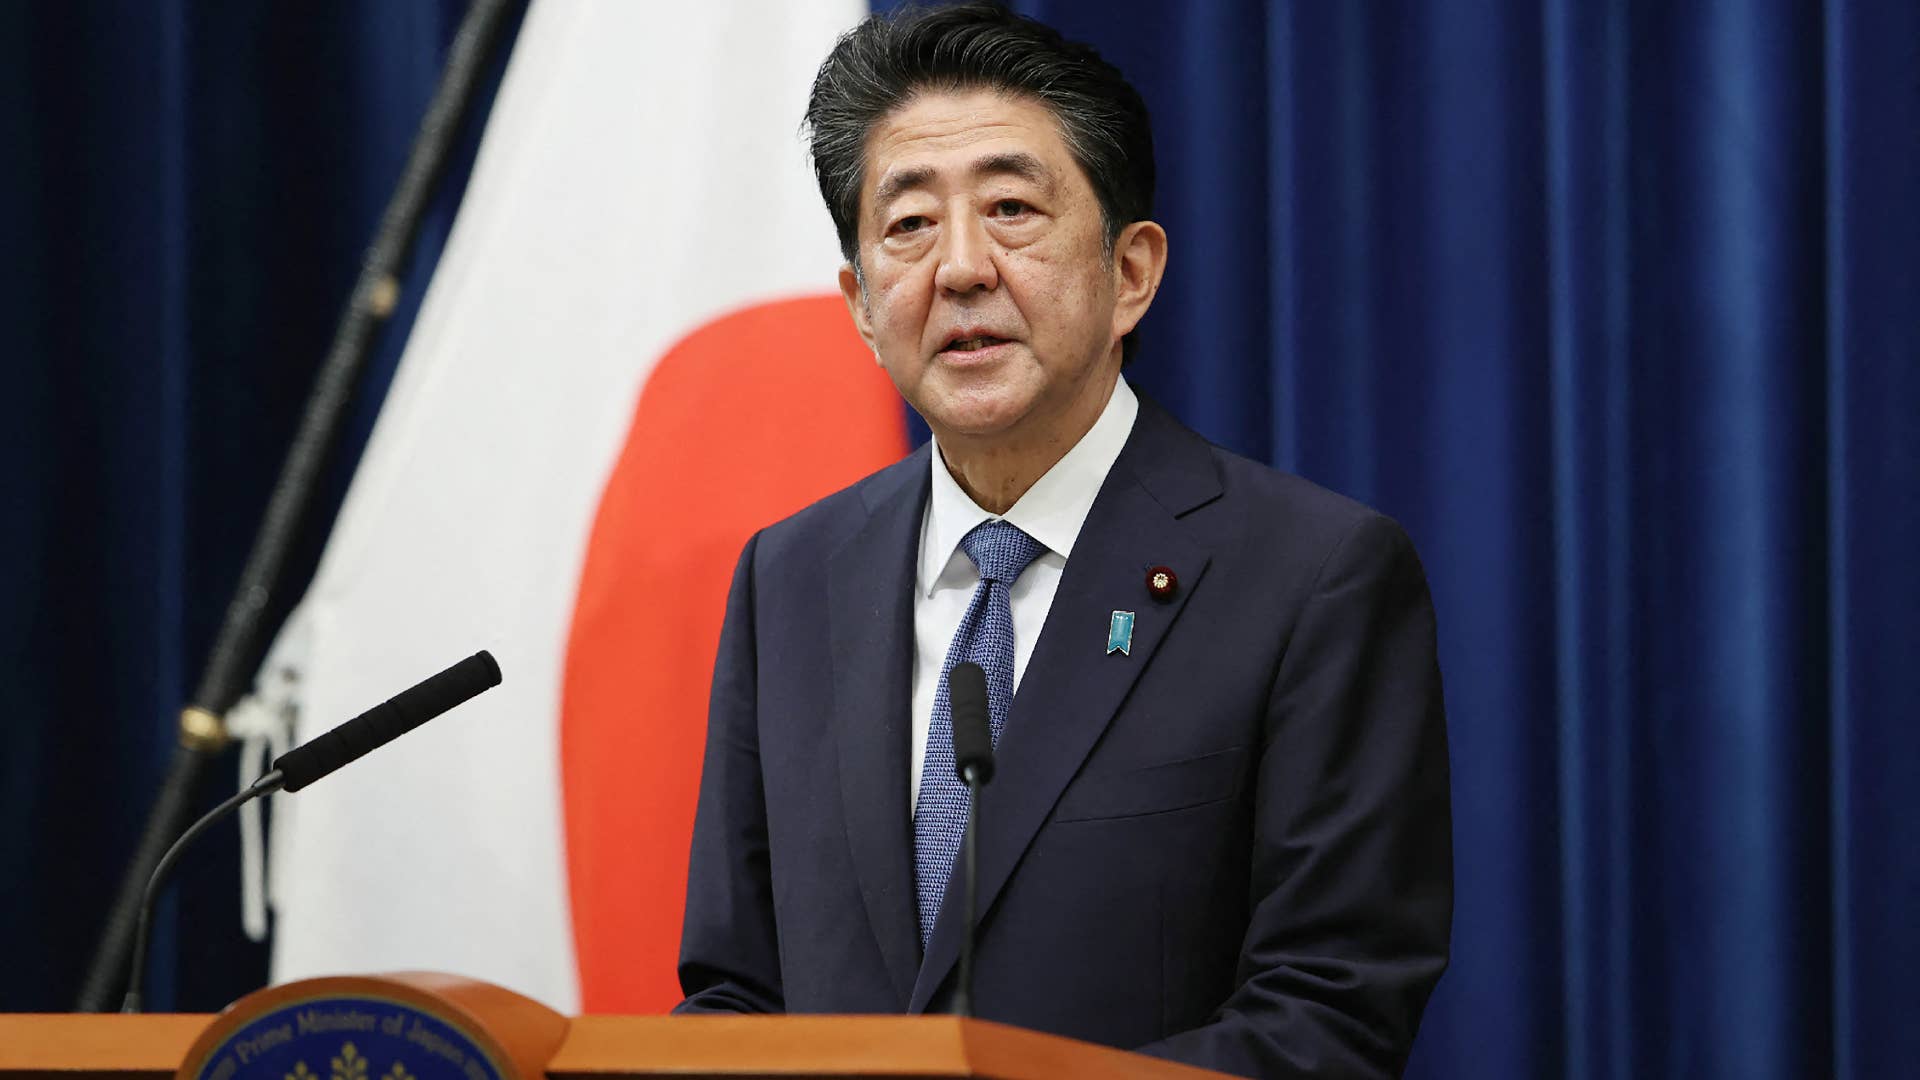 Shinzo Abe is pictured giving a speech